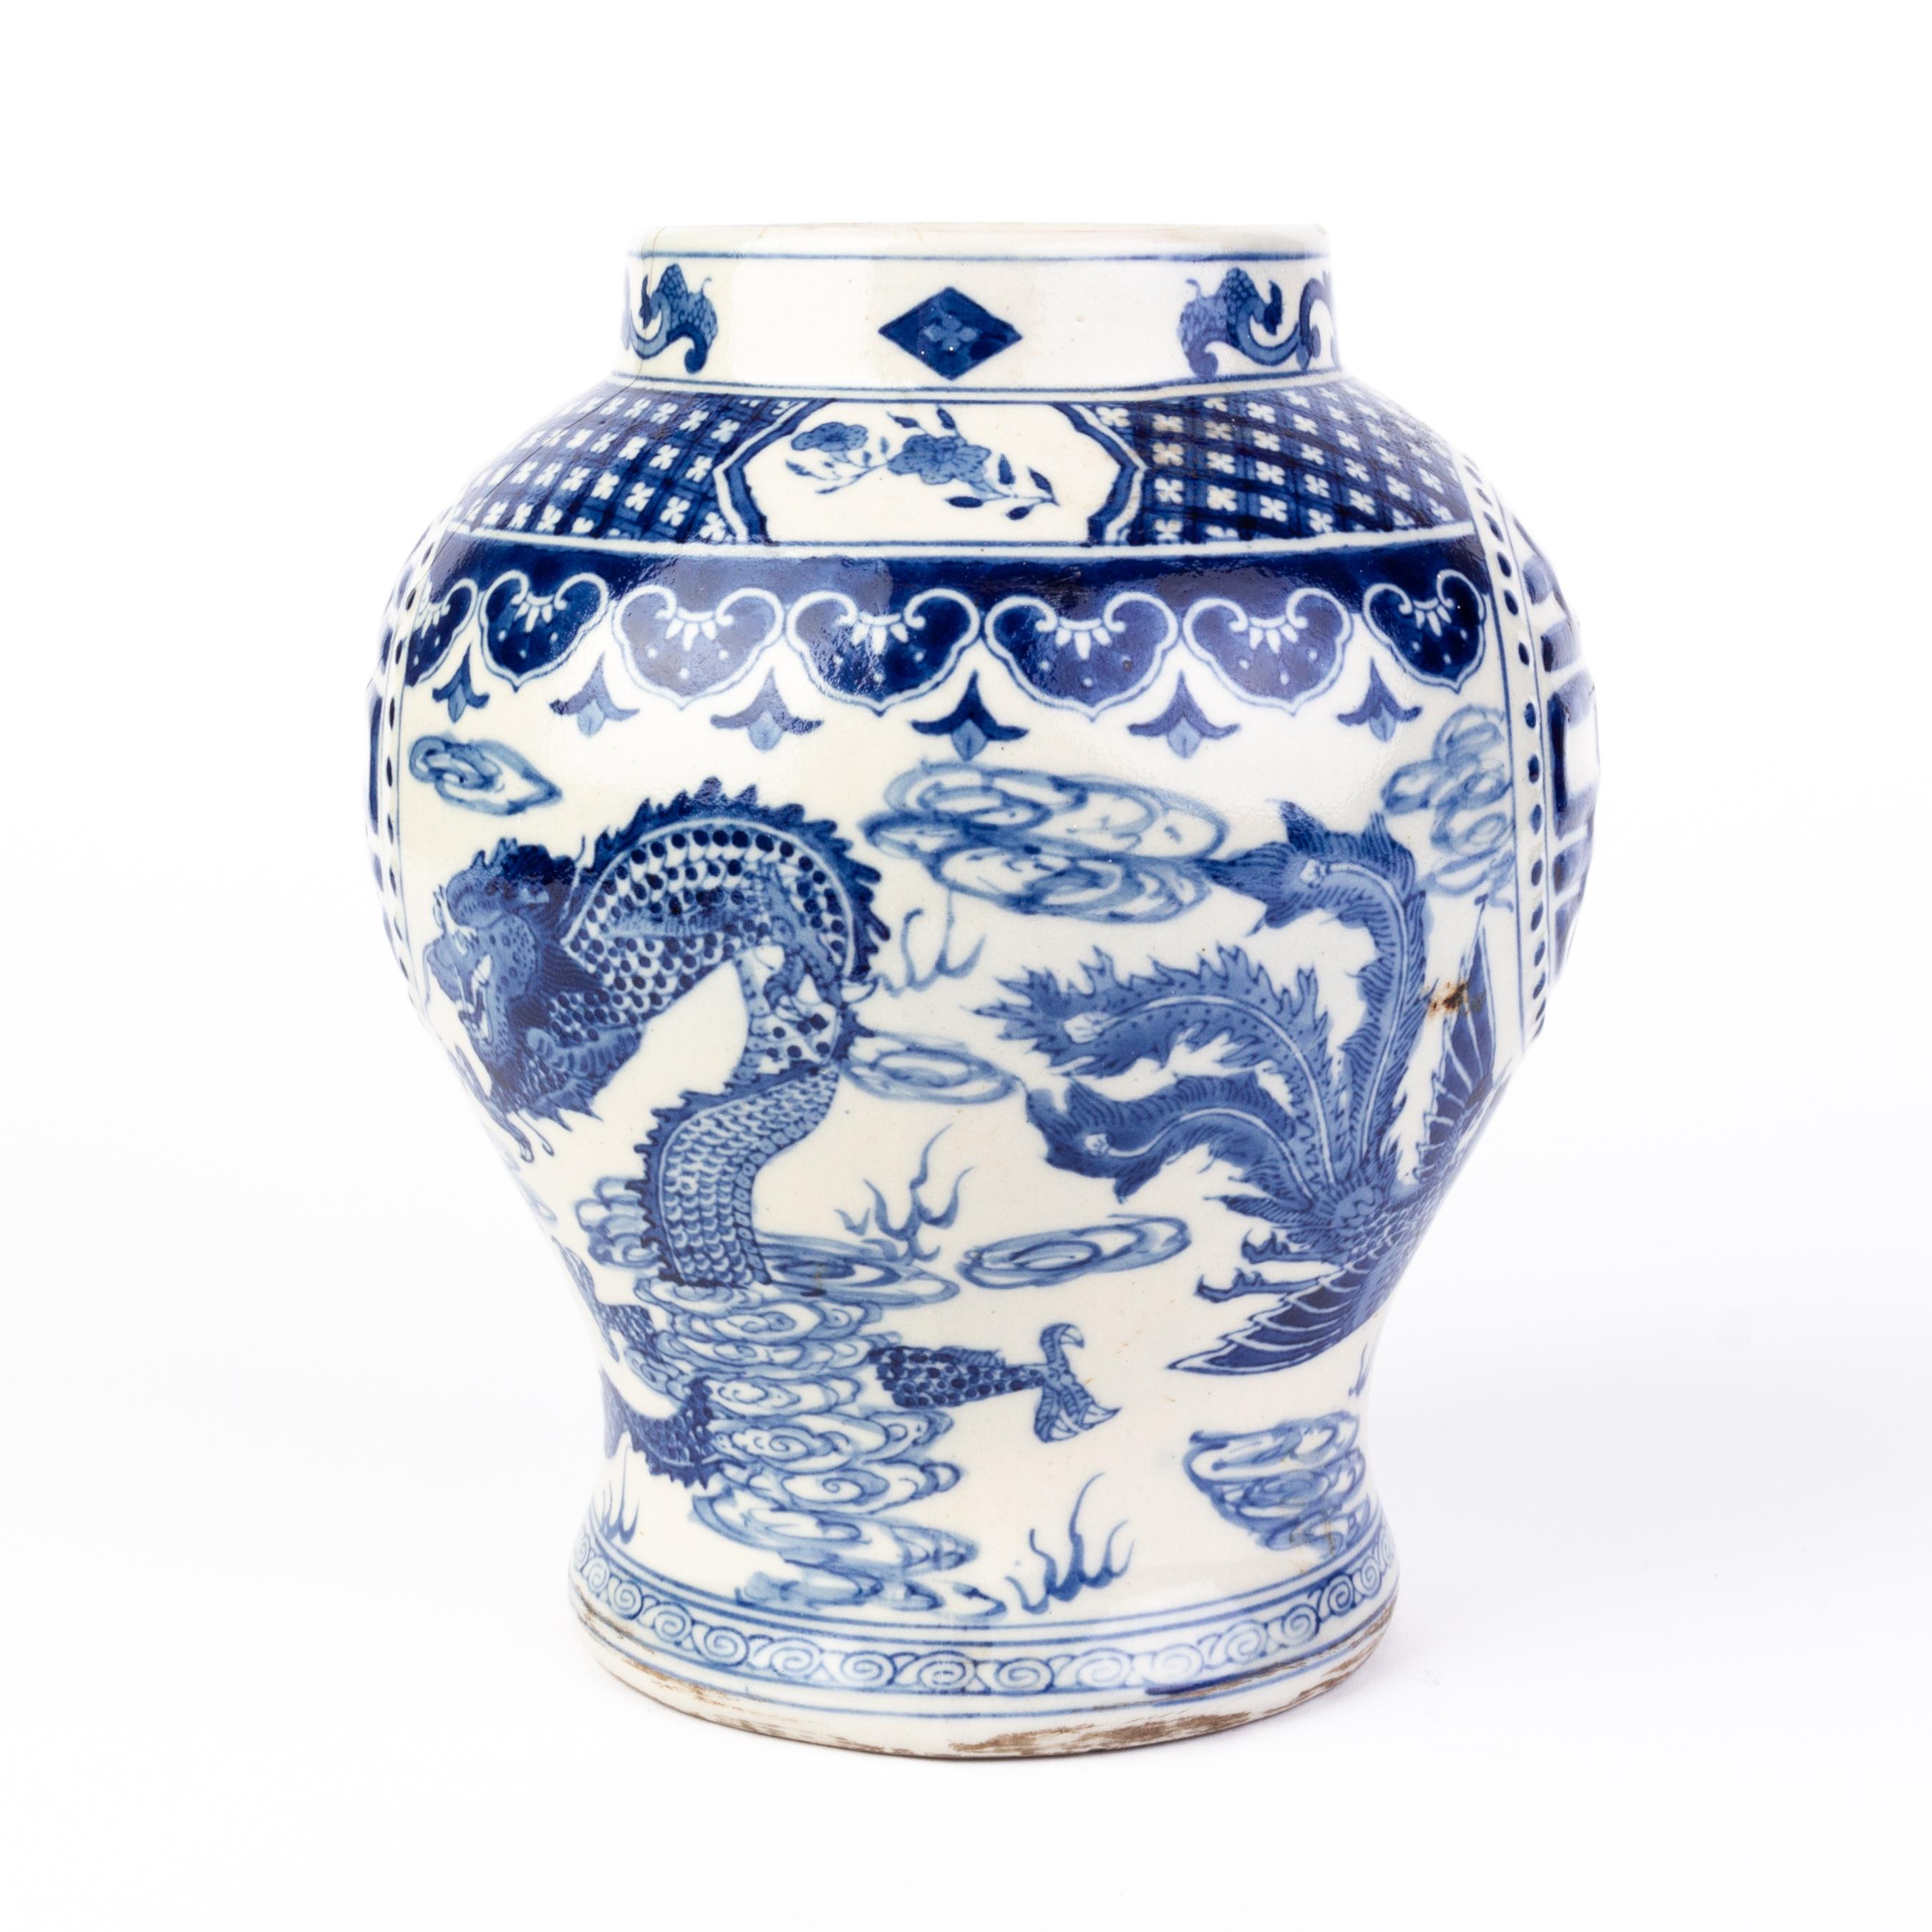 19th Century Chinese Qing Blue & White Porcelain Dragon Ginger Jar Vase with Seal Mark  For Sale